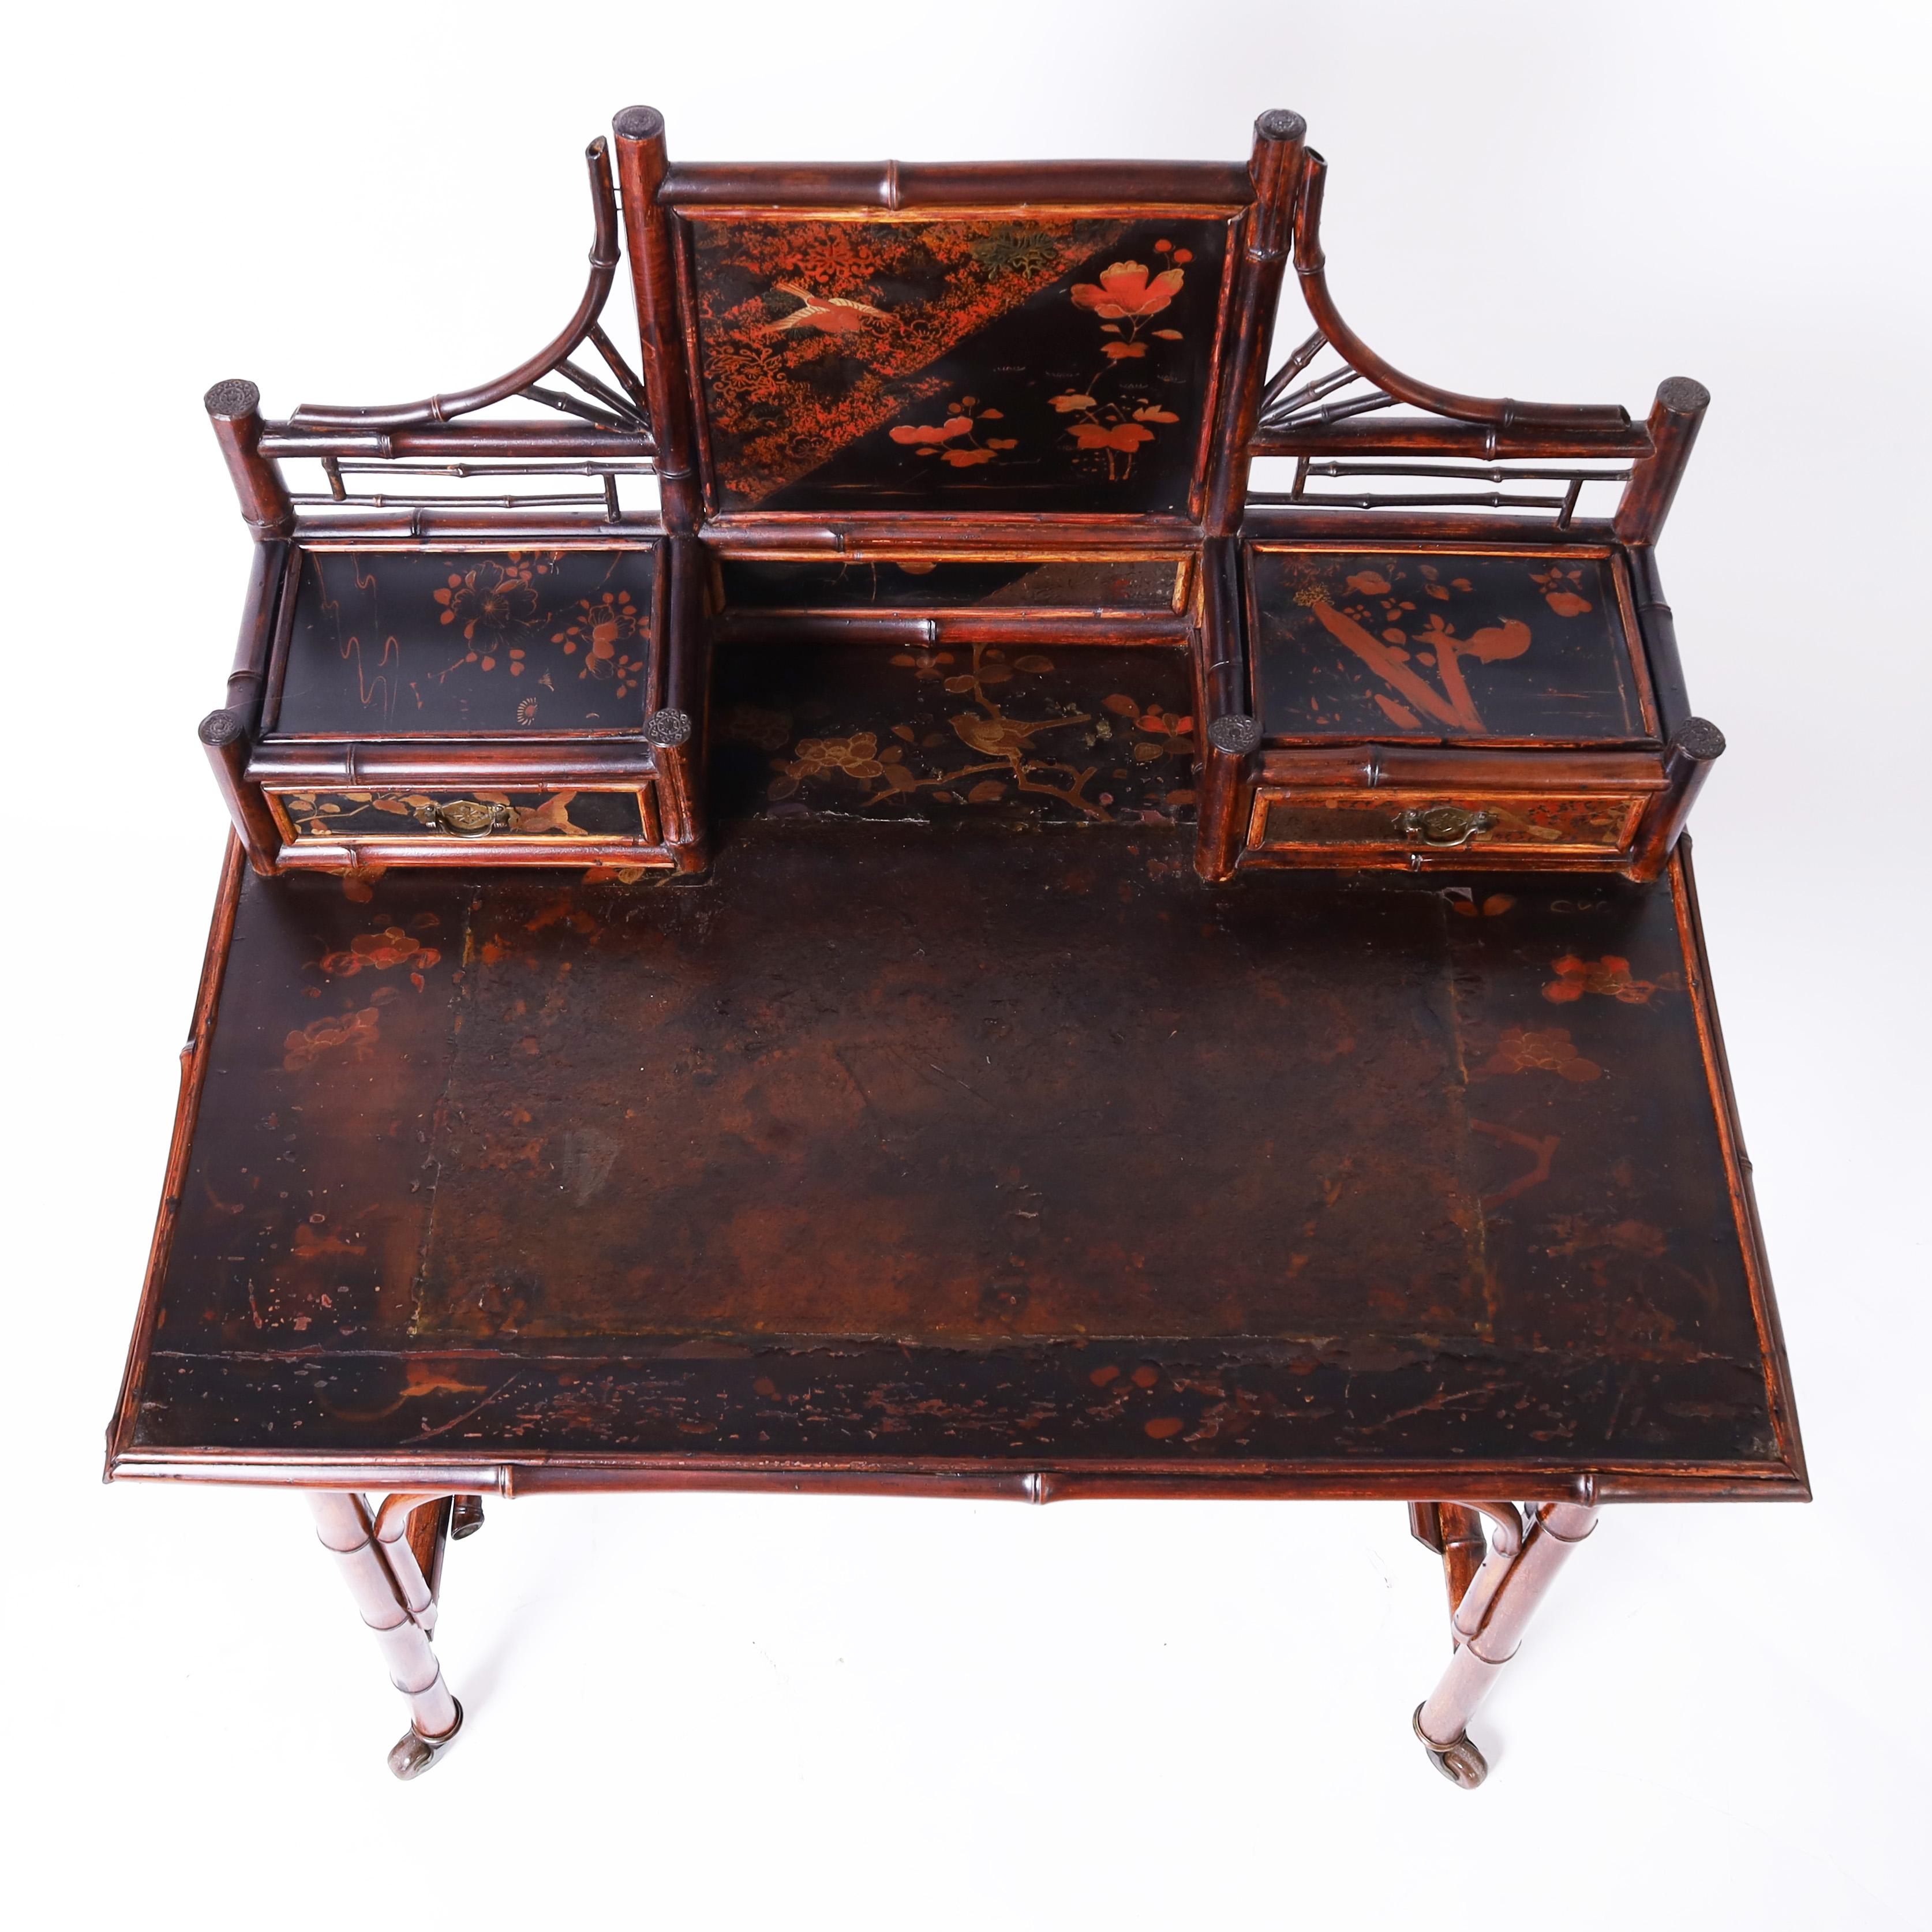 Hand-Crafted Antique English Aesthetics Movement Bamboo and Lacquer Desk For Sale